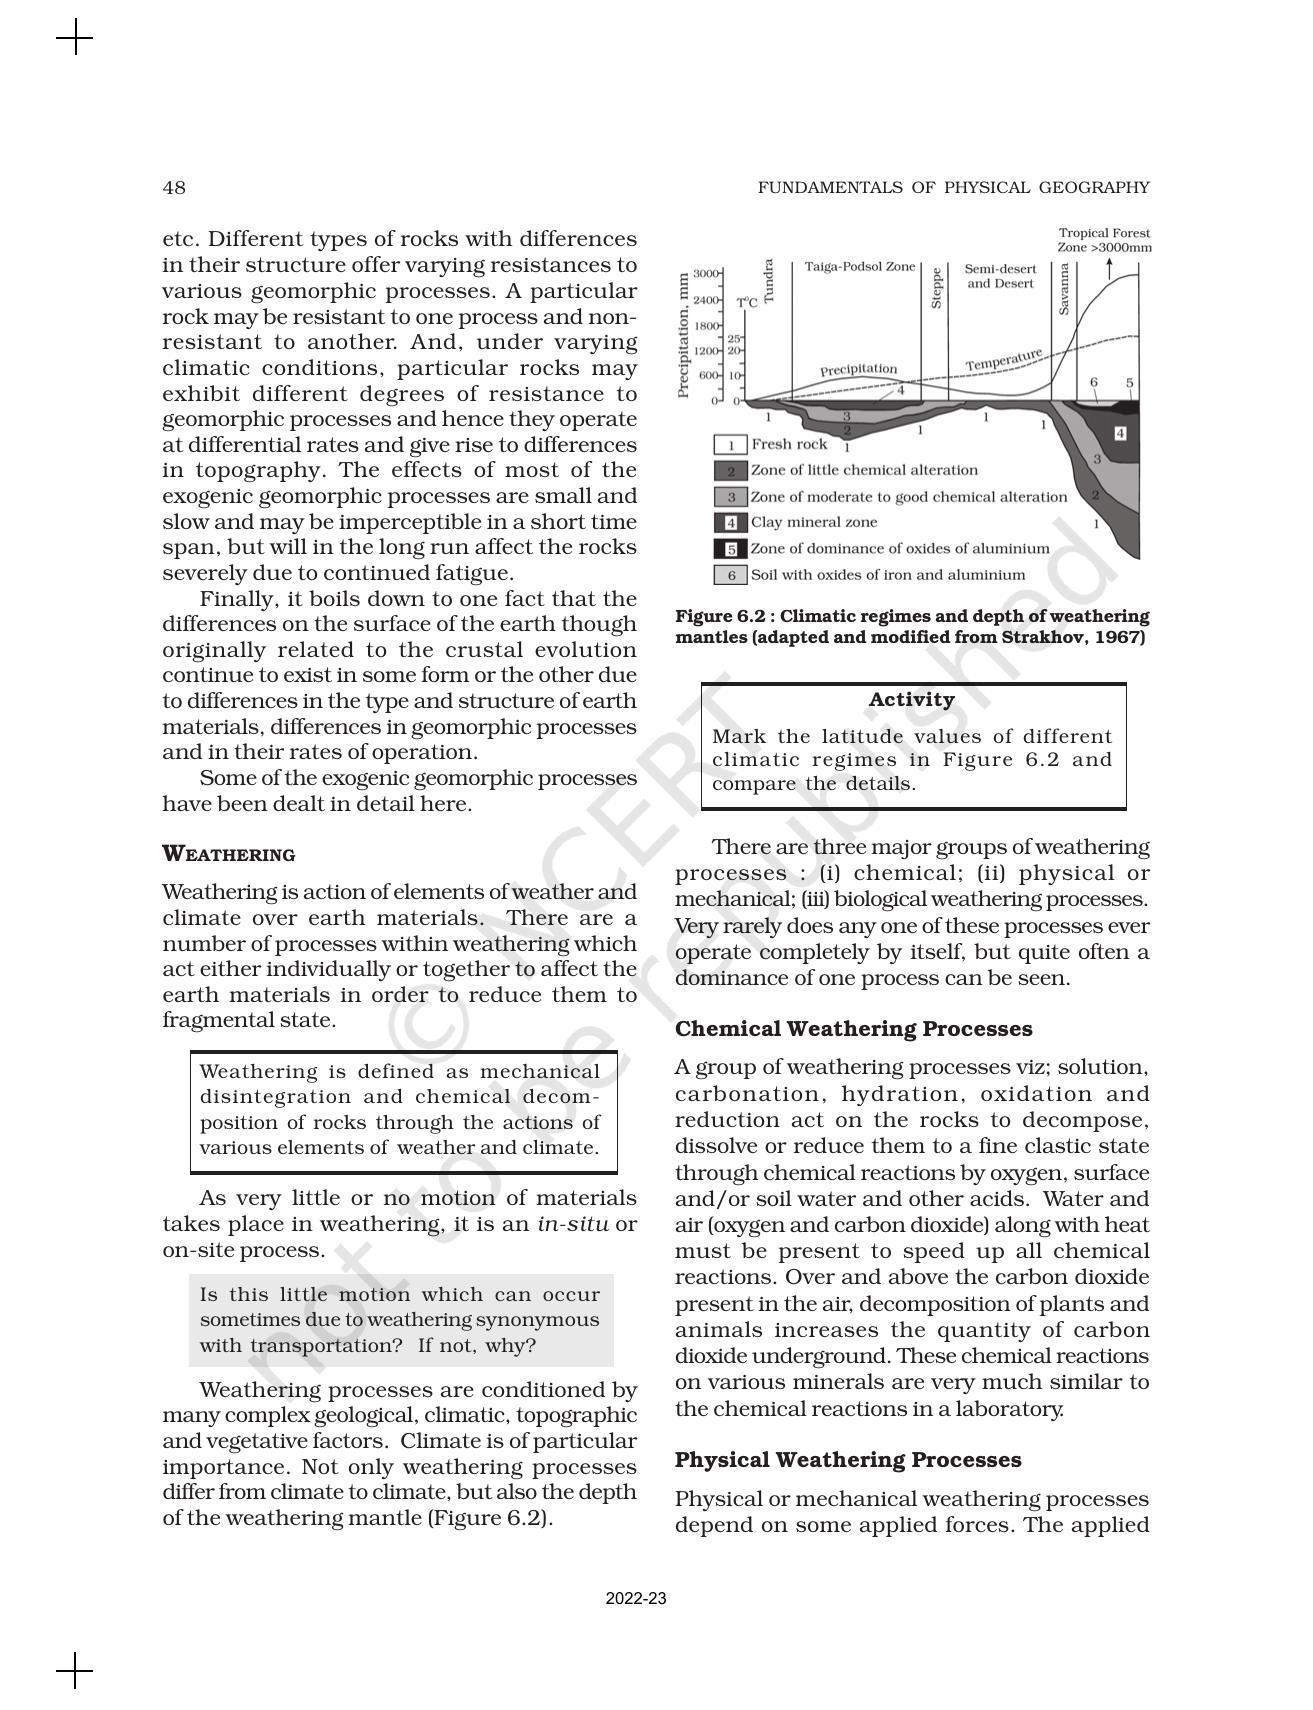 NCERT Book for Class 11 Geography (Part-I) Chapter 6 Geomorphic Processes - Page 4